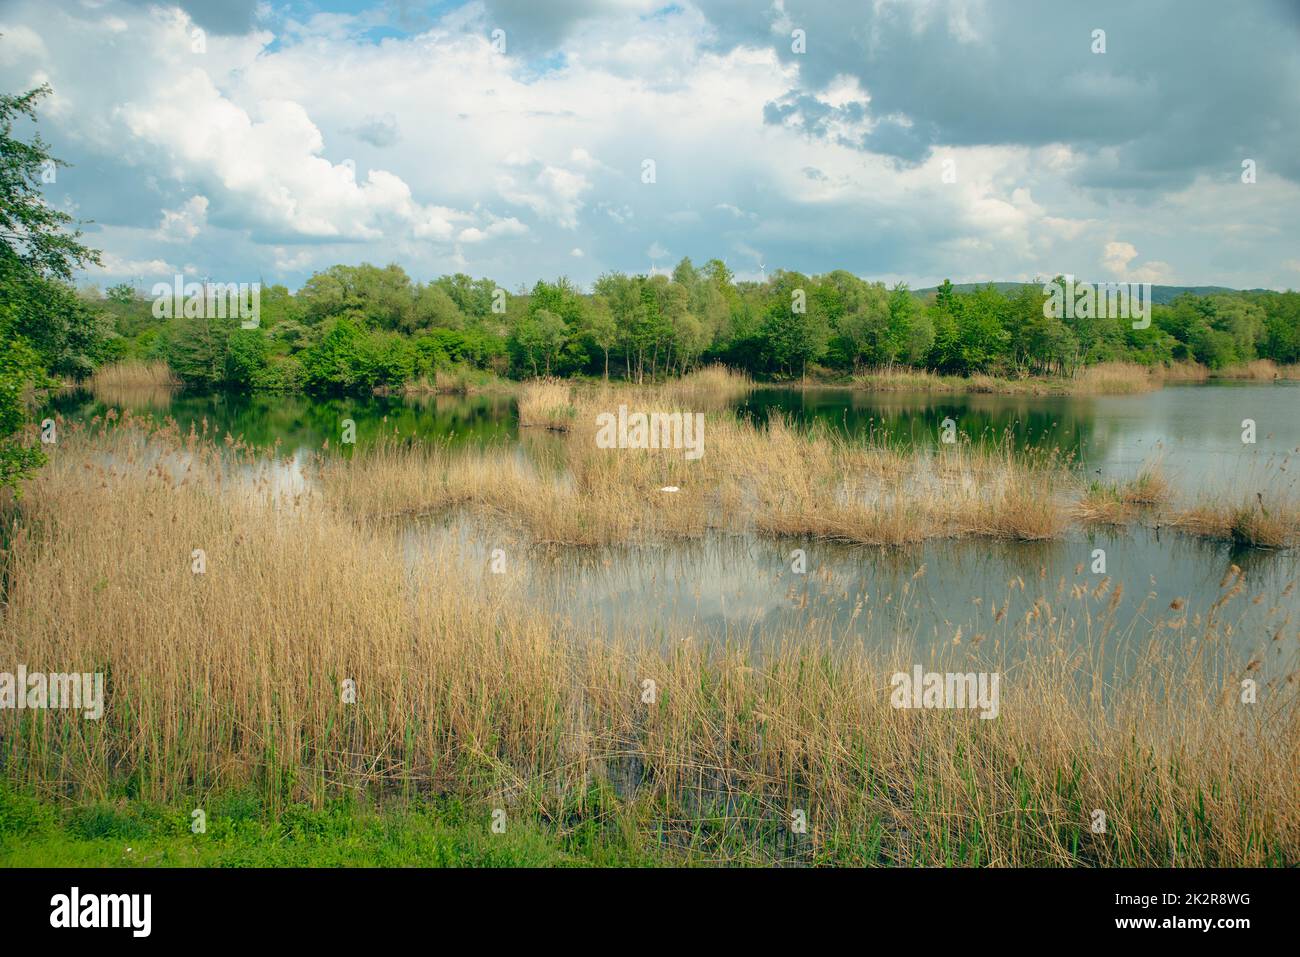 Wetland Haff Reimech in Luxembourg, swamp habitat, nature reserve and biotope Stock Photo